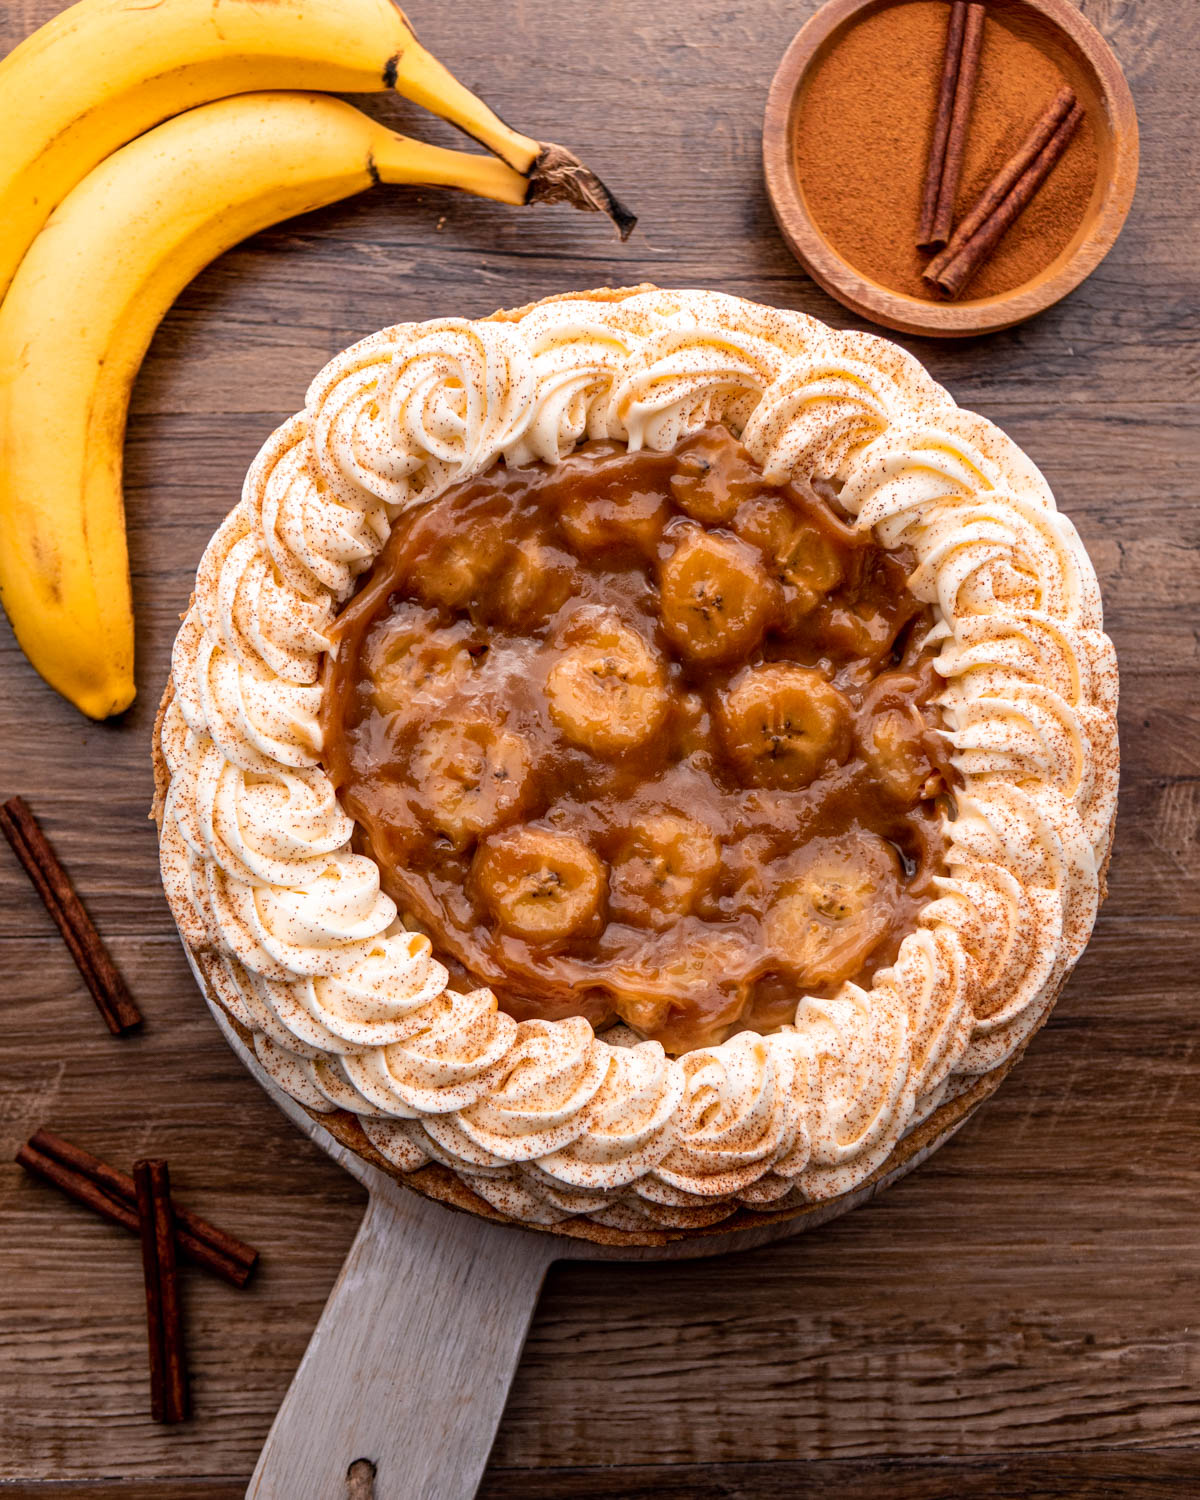 bananas foster cheesecake assembled on wood serving tray 